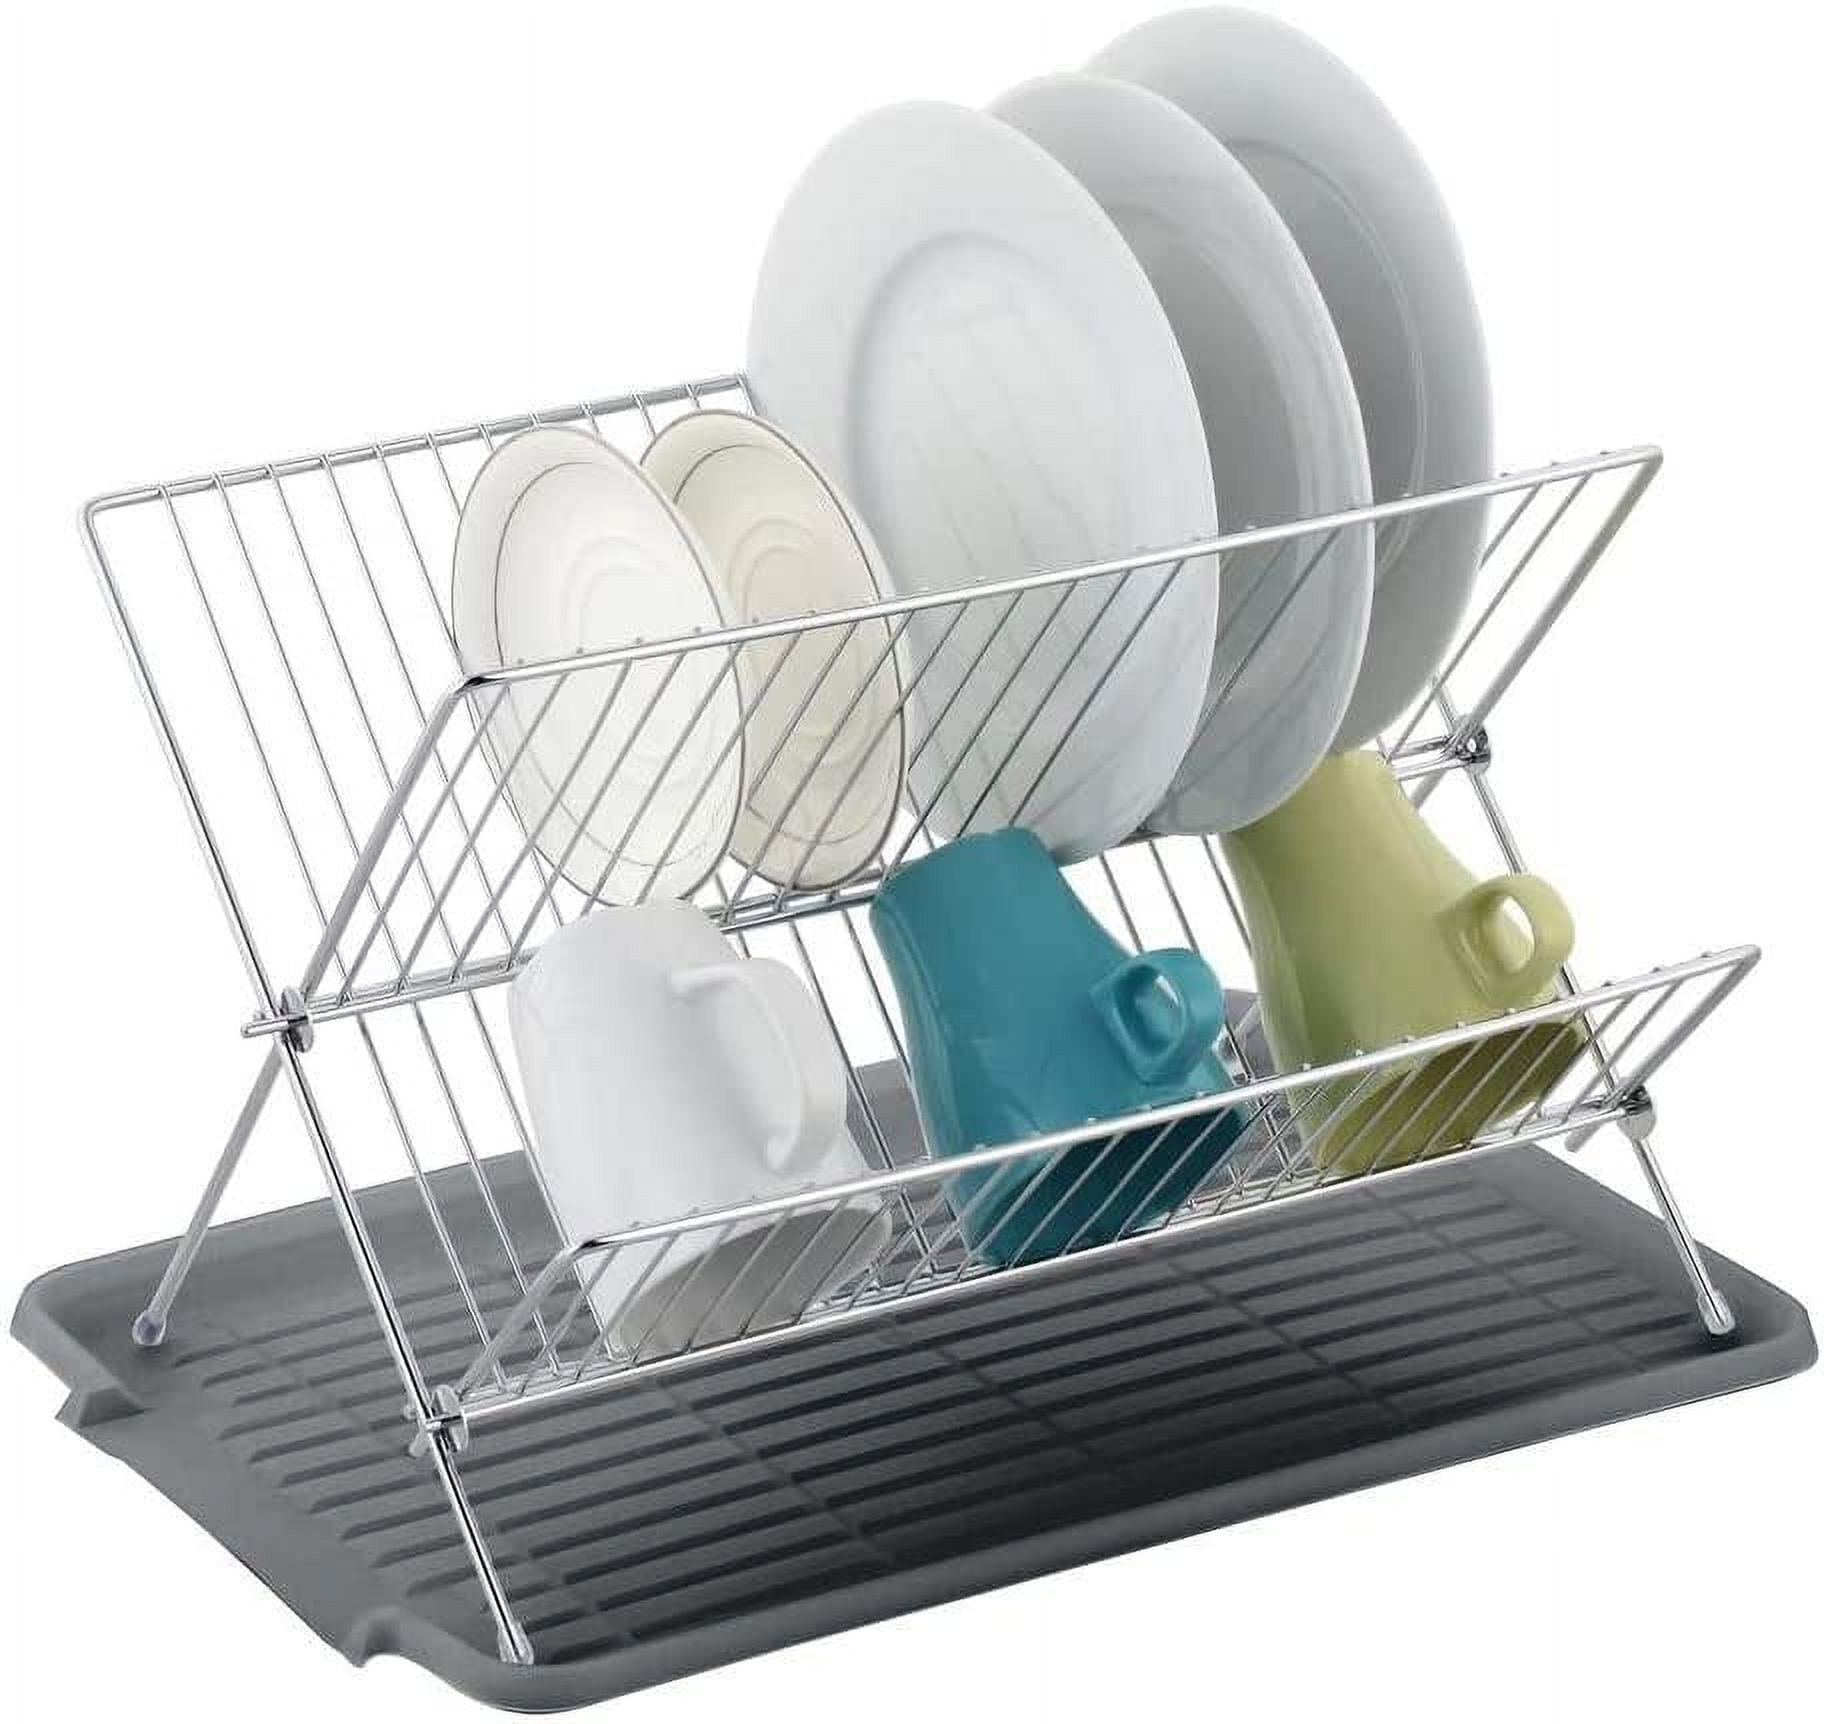  Youeon Foldable Dish Drying Rack with Drip Tray, Stainless  Steel 2 Tier Dish Drainer Rack, Collapsible Dish Drainer, Folding Dish Rack  for Kitchen Sink, Countertop, Cutlery, Plates, Dishes